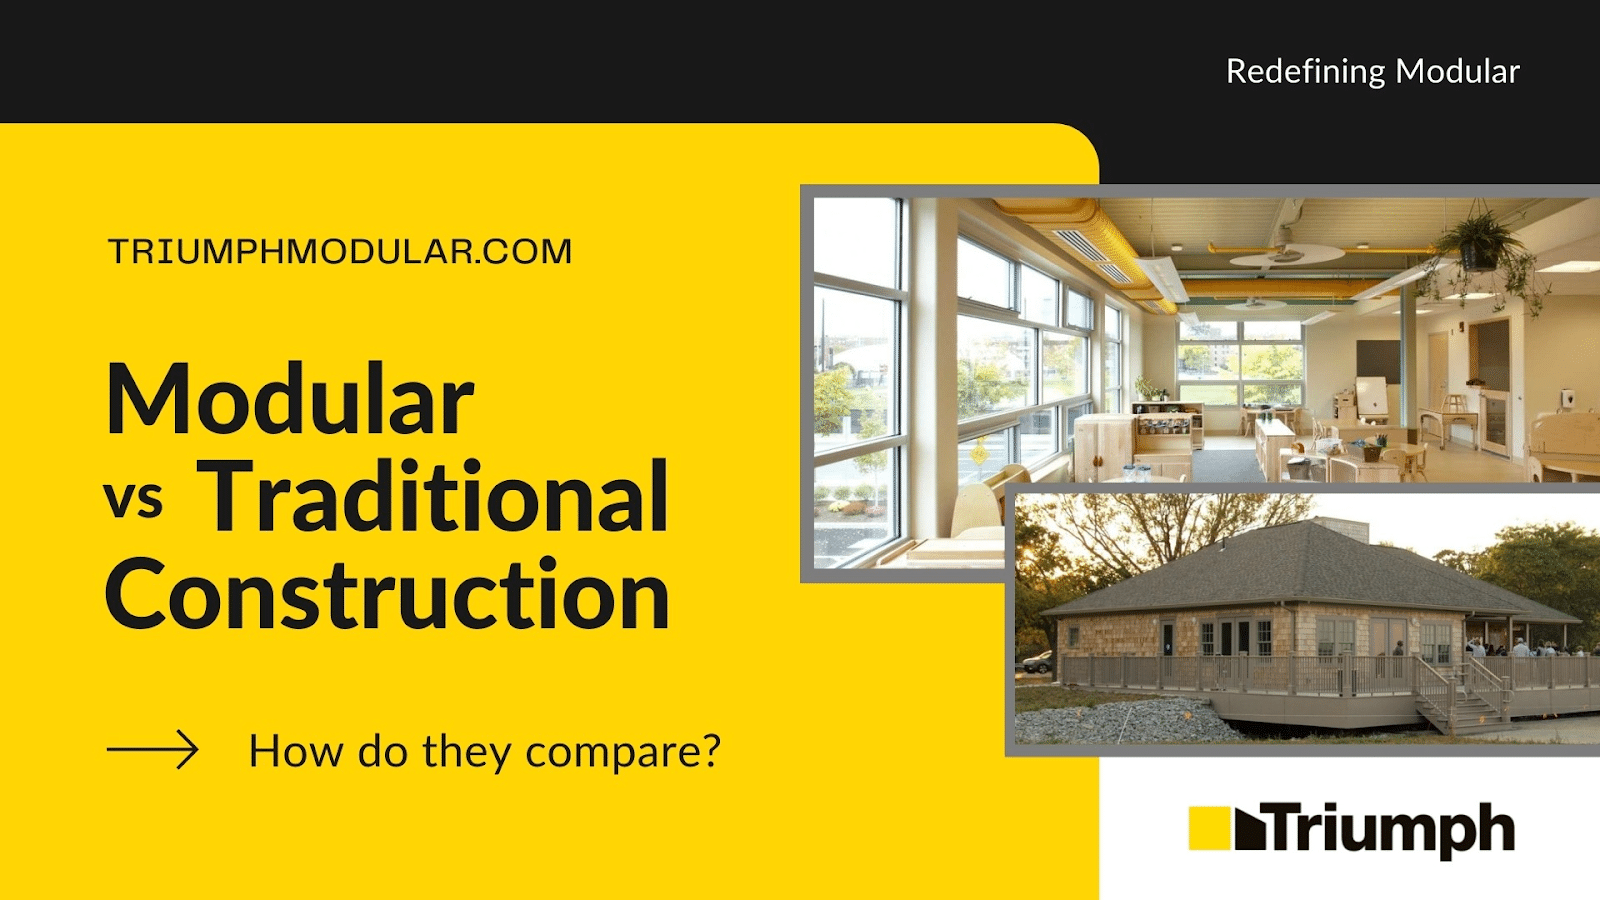 featured image for an article on modular vs. traditional construction